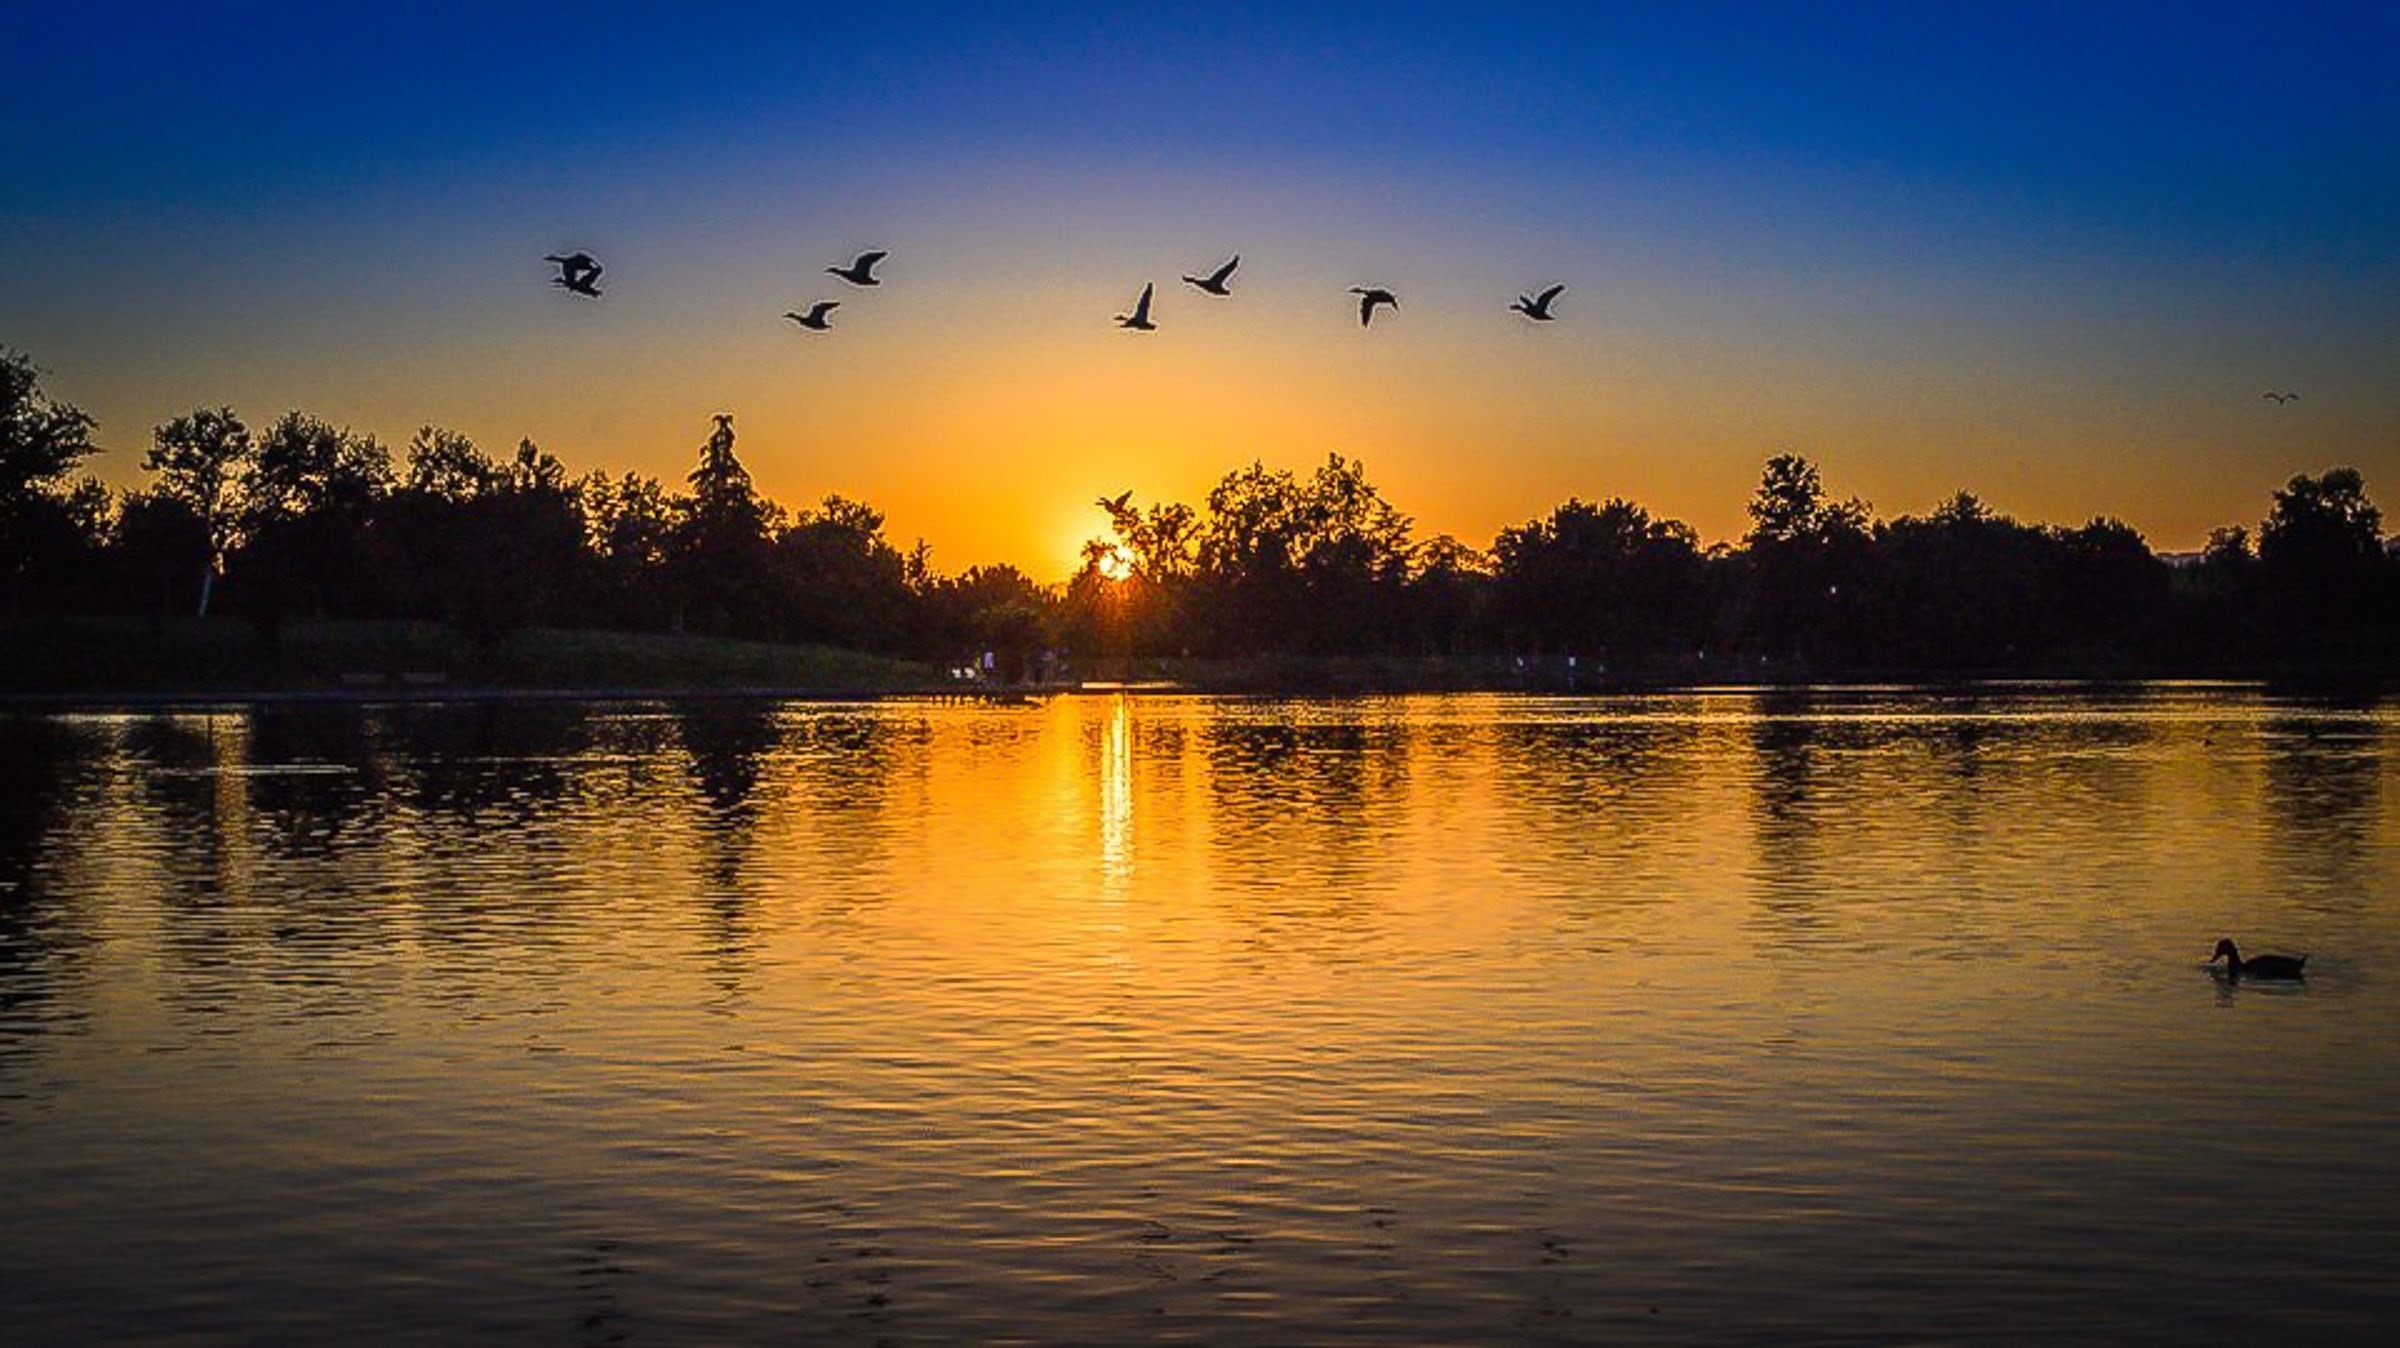 Silhouette of forest with birds flying above body of water during sunset photo